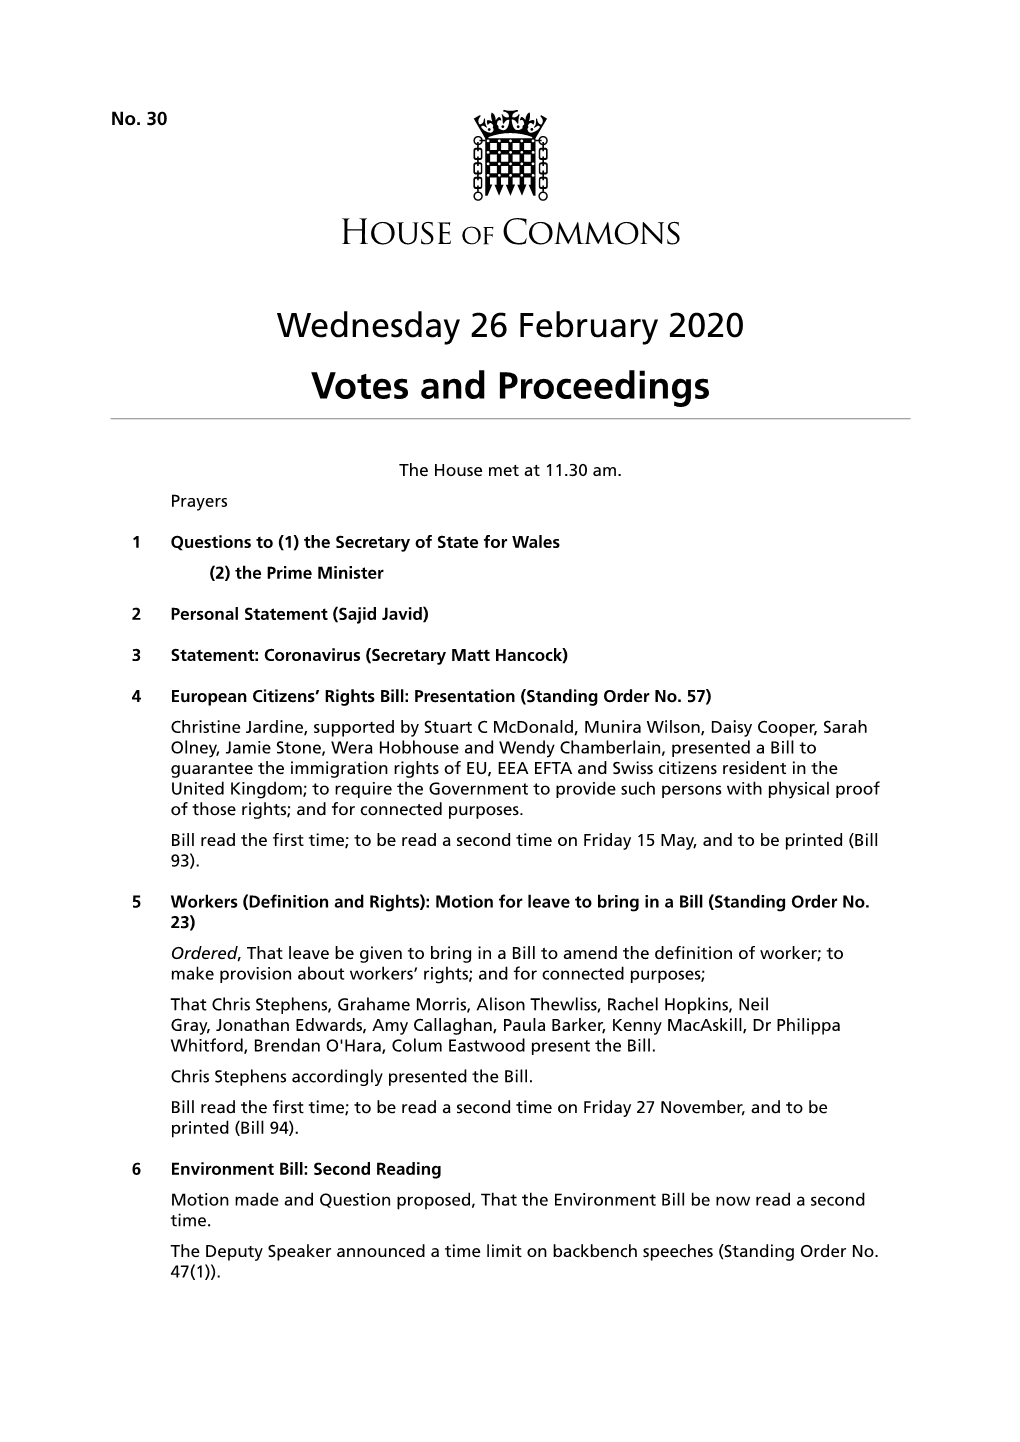 26 February 2020 Votes and Proceedings